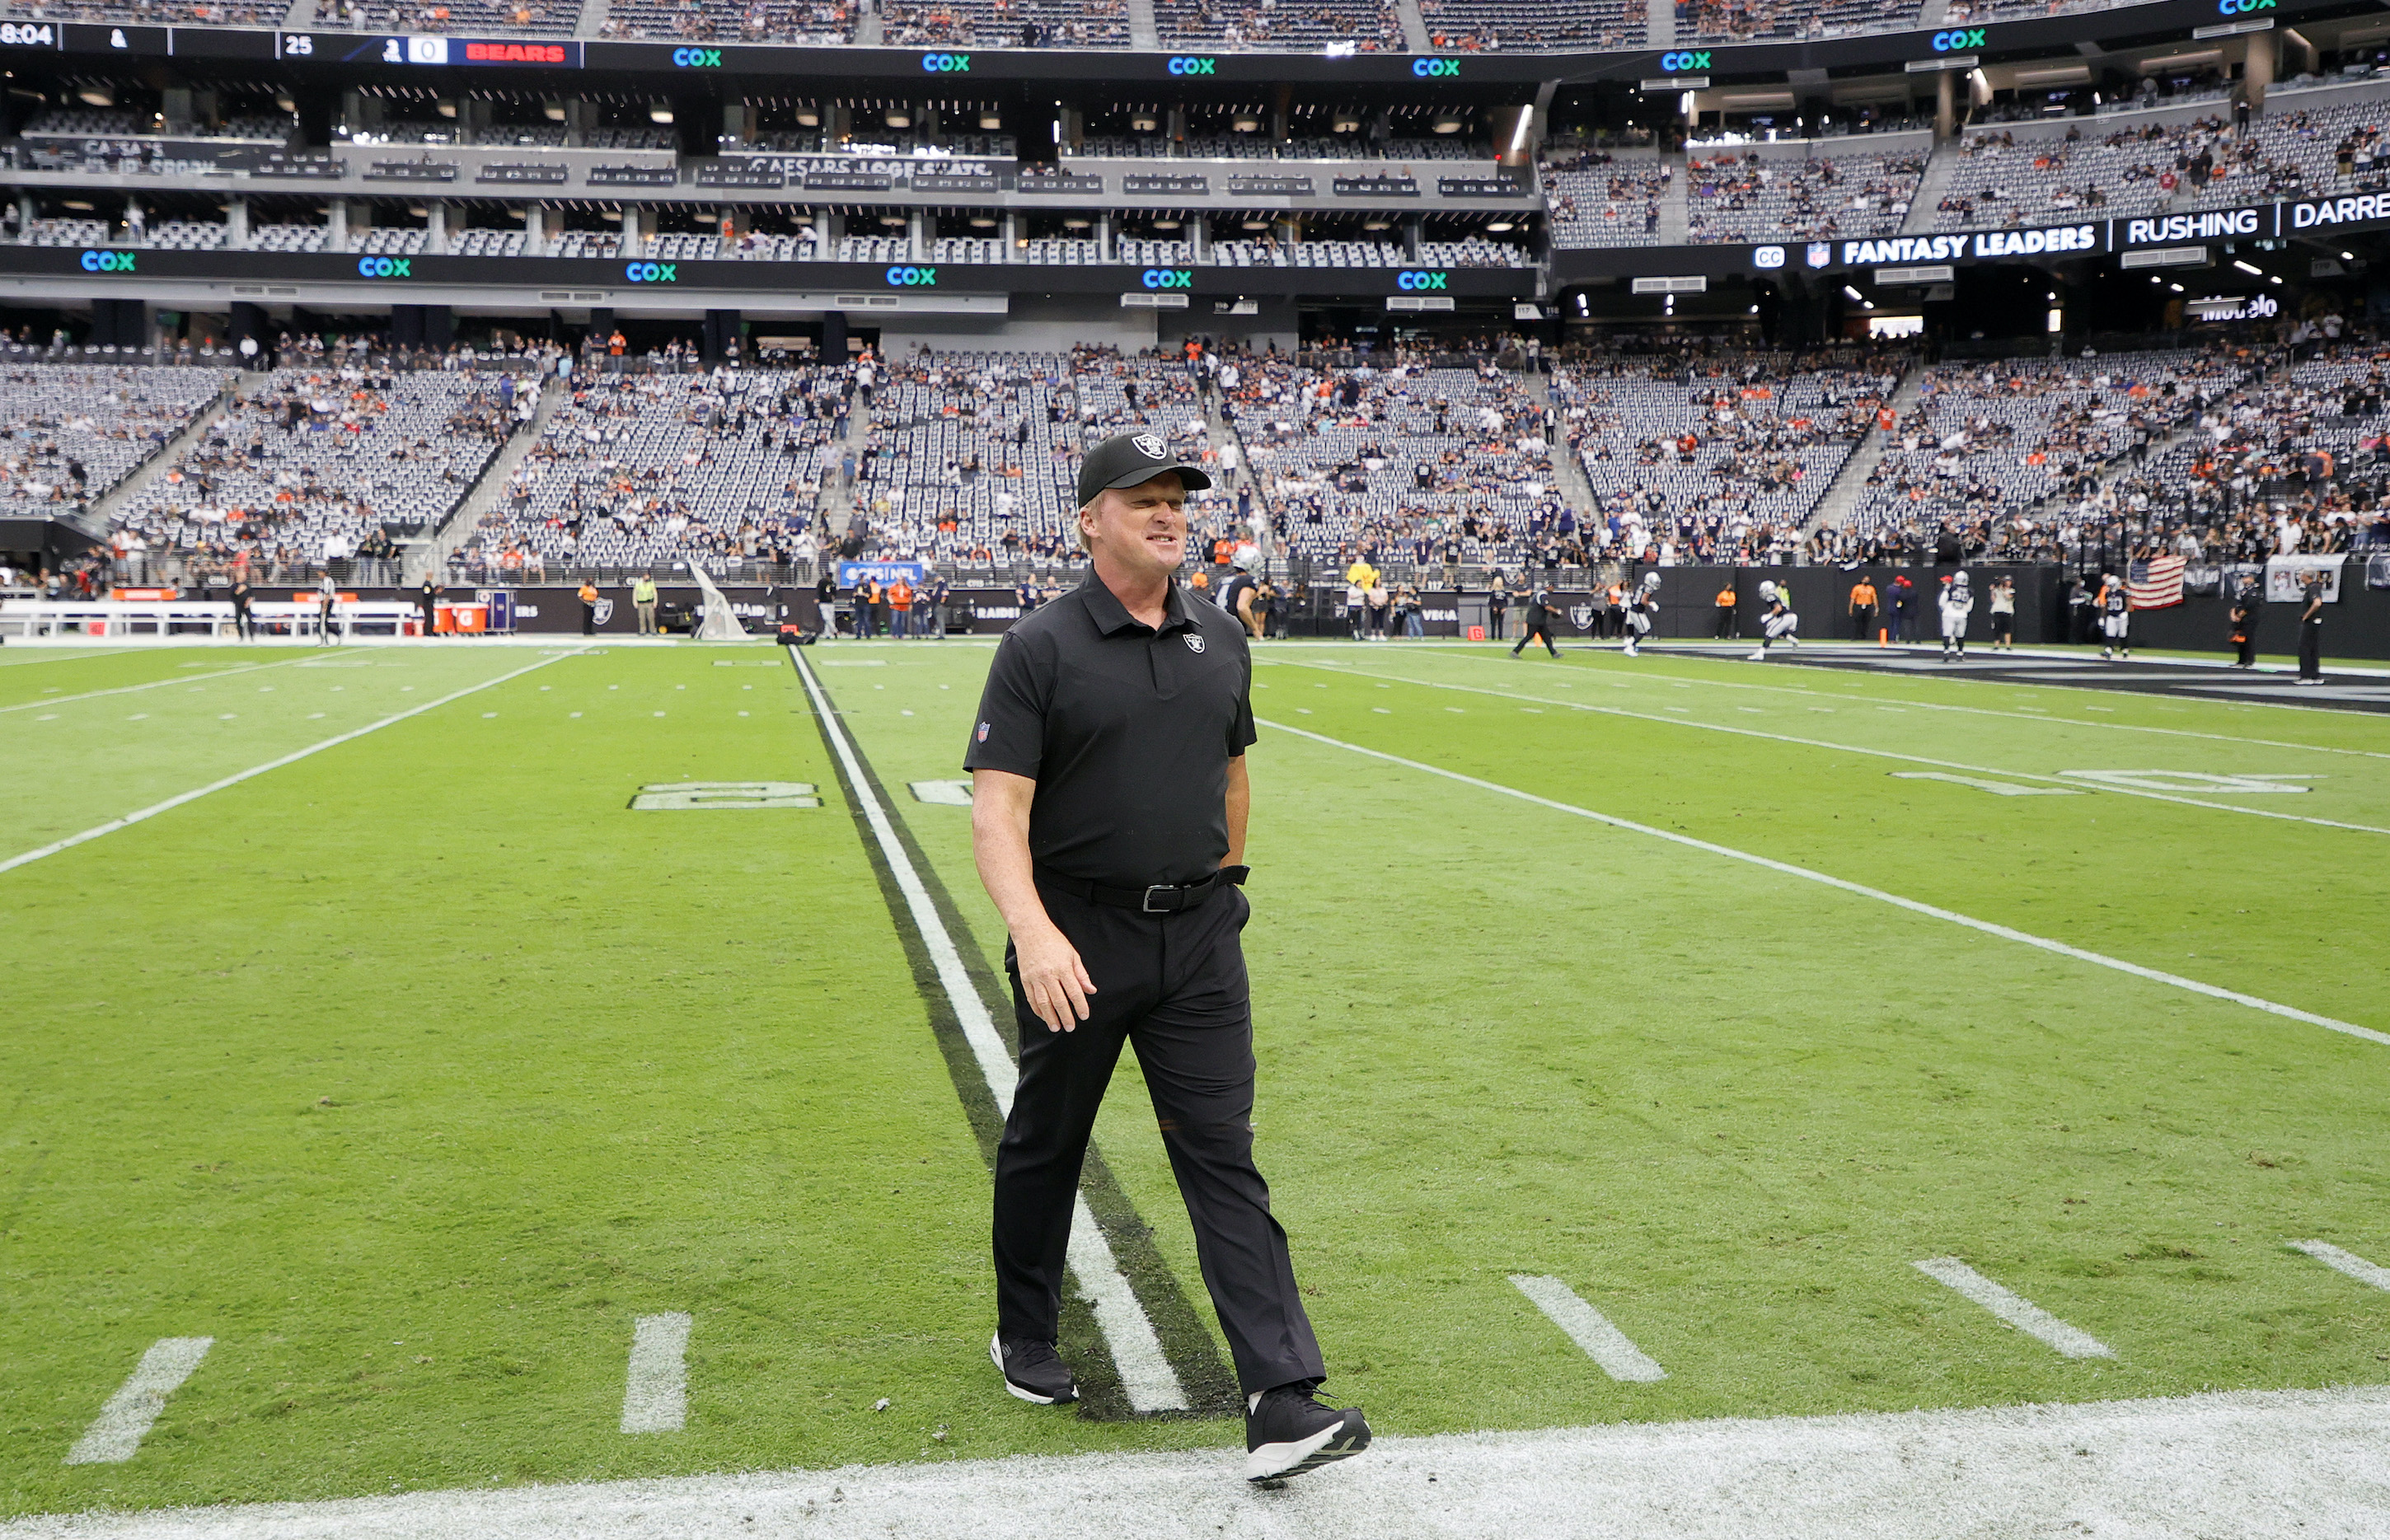 Head coach John Gruden of the Las Vegas Raiders walks on the field before a game against the Chicago Bears at Allegiant Stadium.